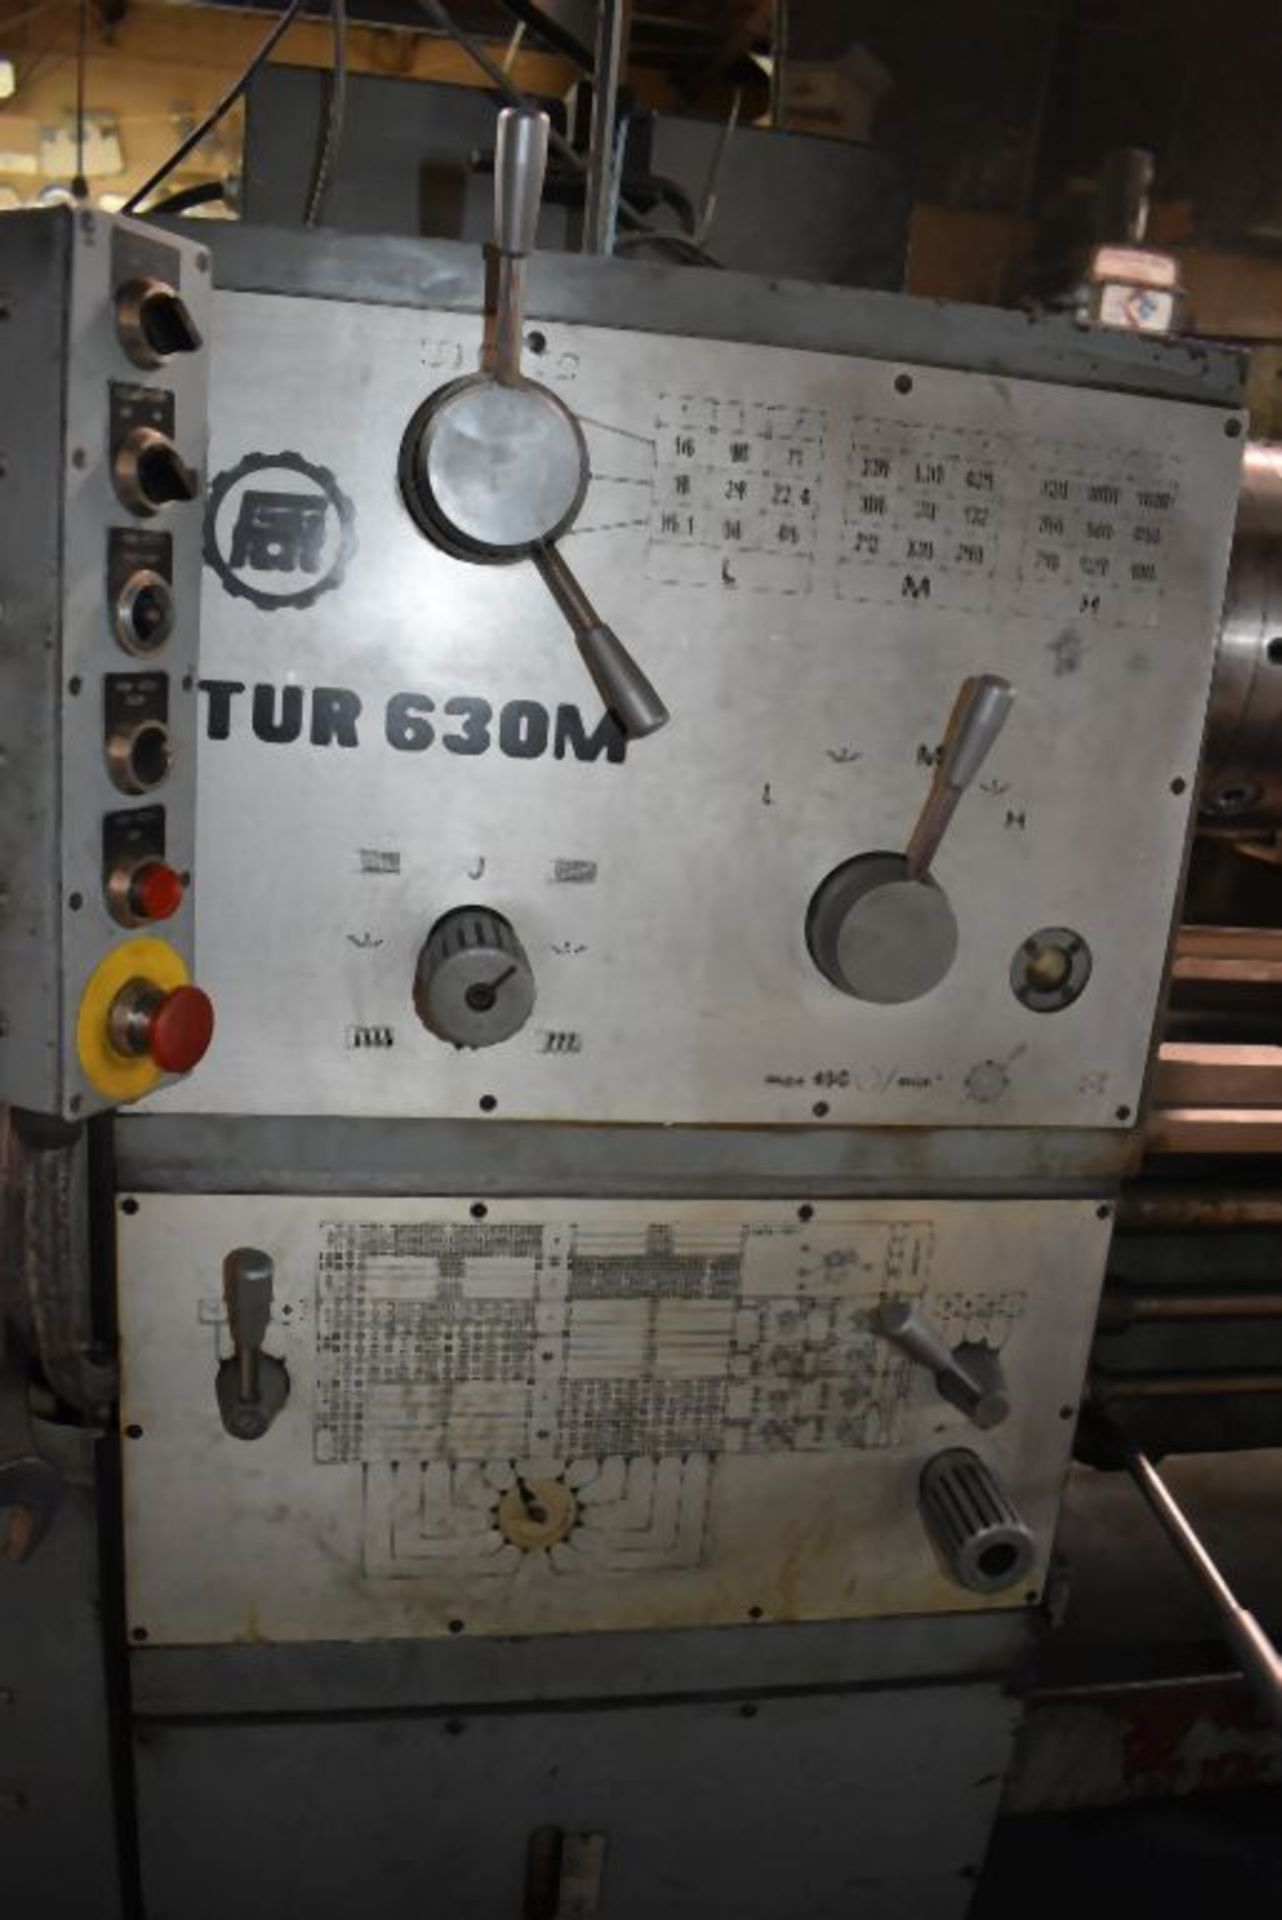 (1994) TOOLMEX (POLAND) ENGINE LATHE, MODEL TUR-630M, S/N: 50443, 12" 3-JAW CHUCK, 4" SPINDLE BORE - Image 4 of 5